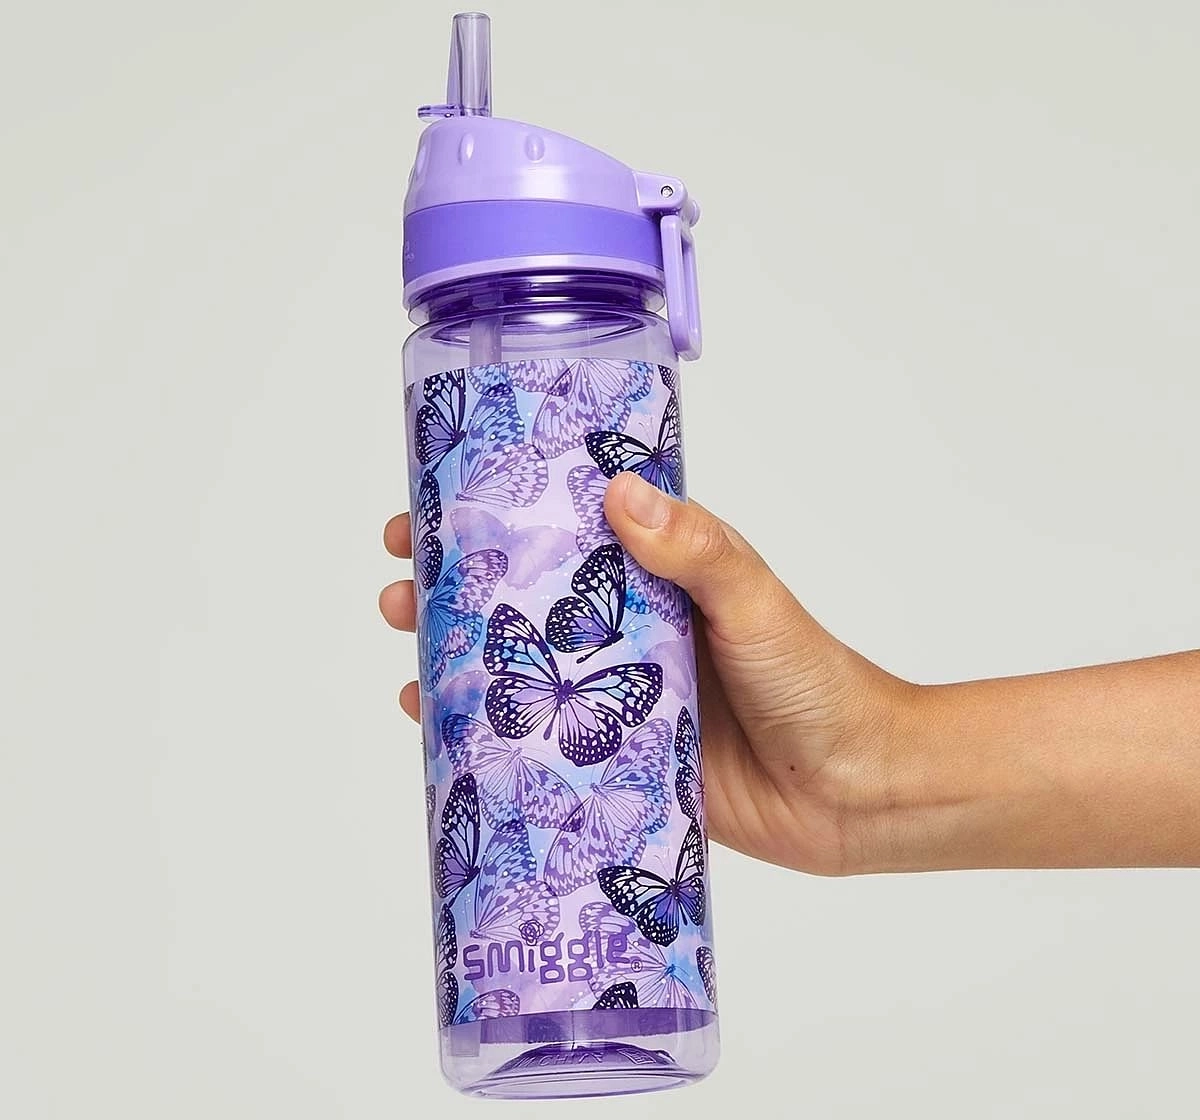 Smiggle Mirage Collection Bottles Plastic, Purple, 4Y+